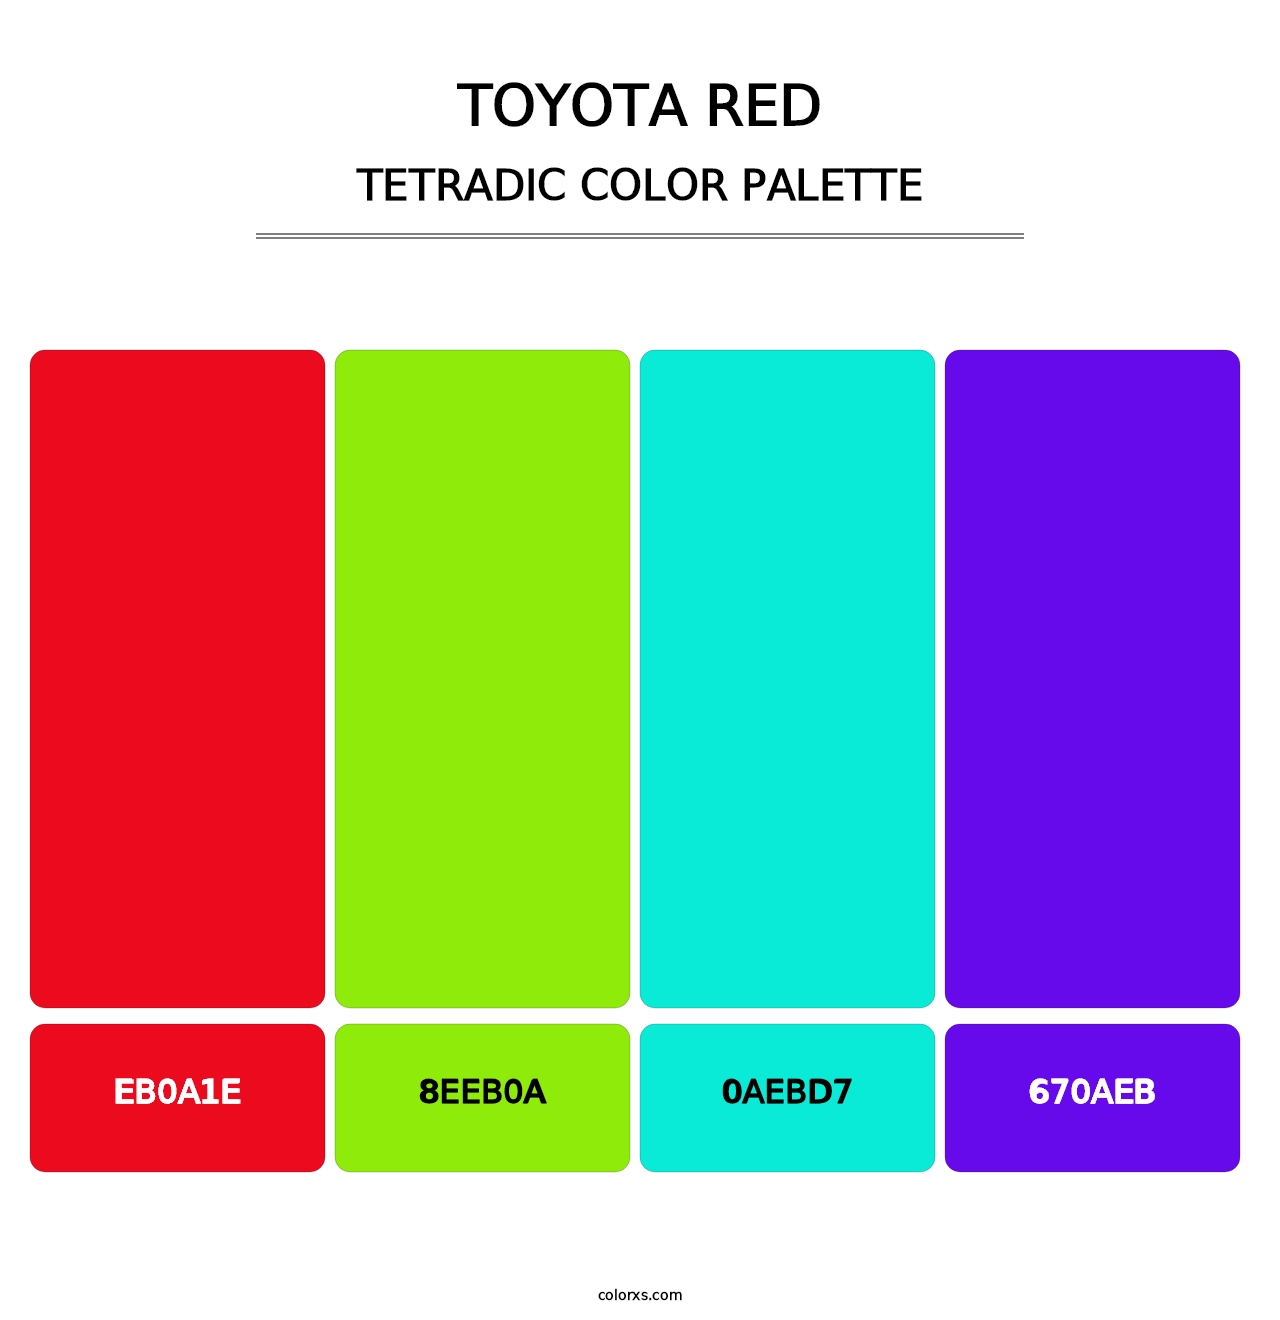 Toyota Red - Tetradic Color Palette